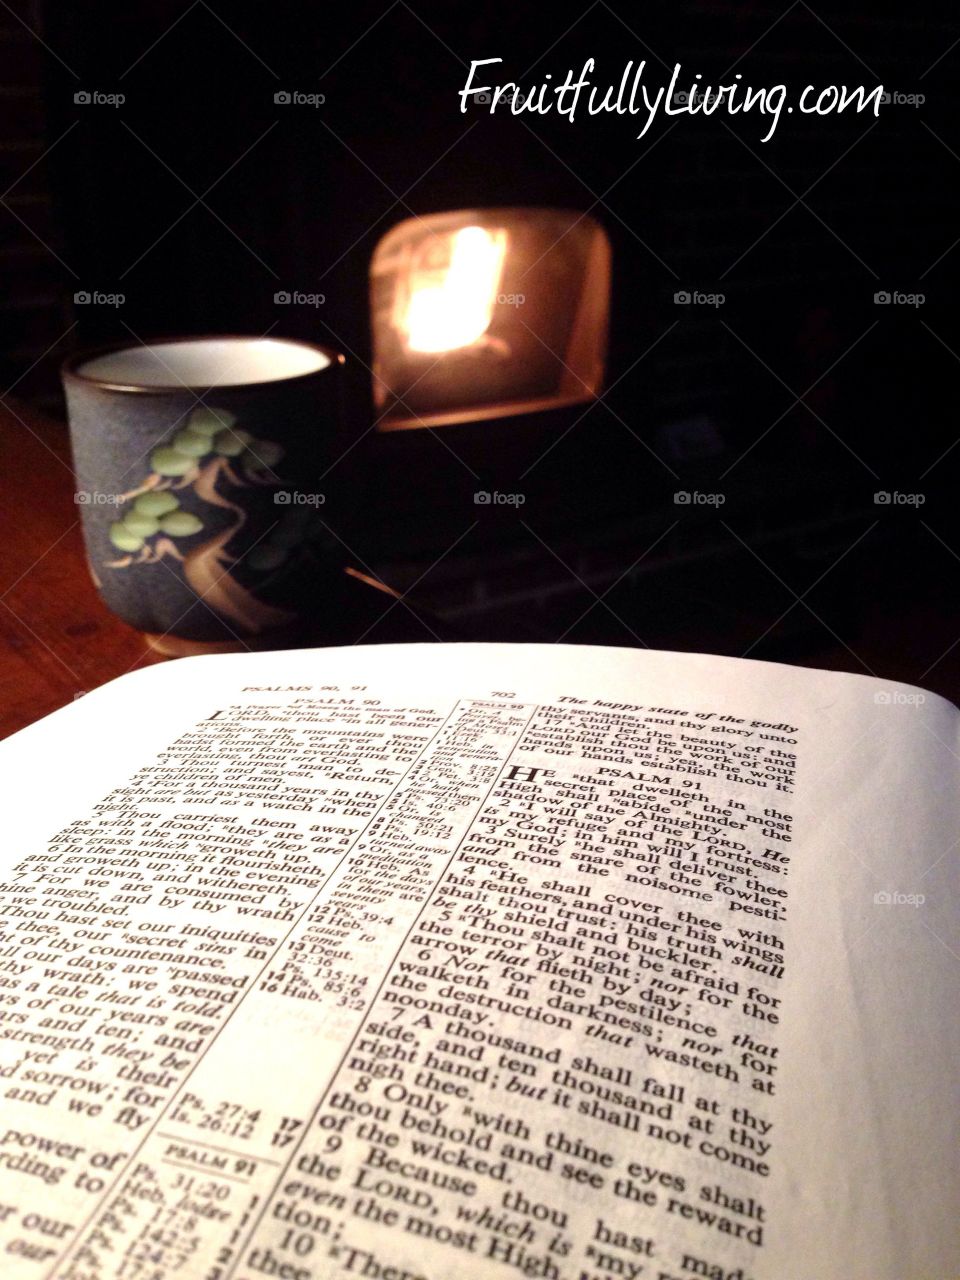 Morning Devotional. Bible reading and prayers in the morning next to the fireplace